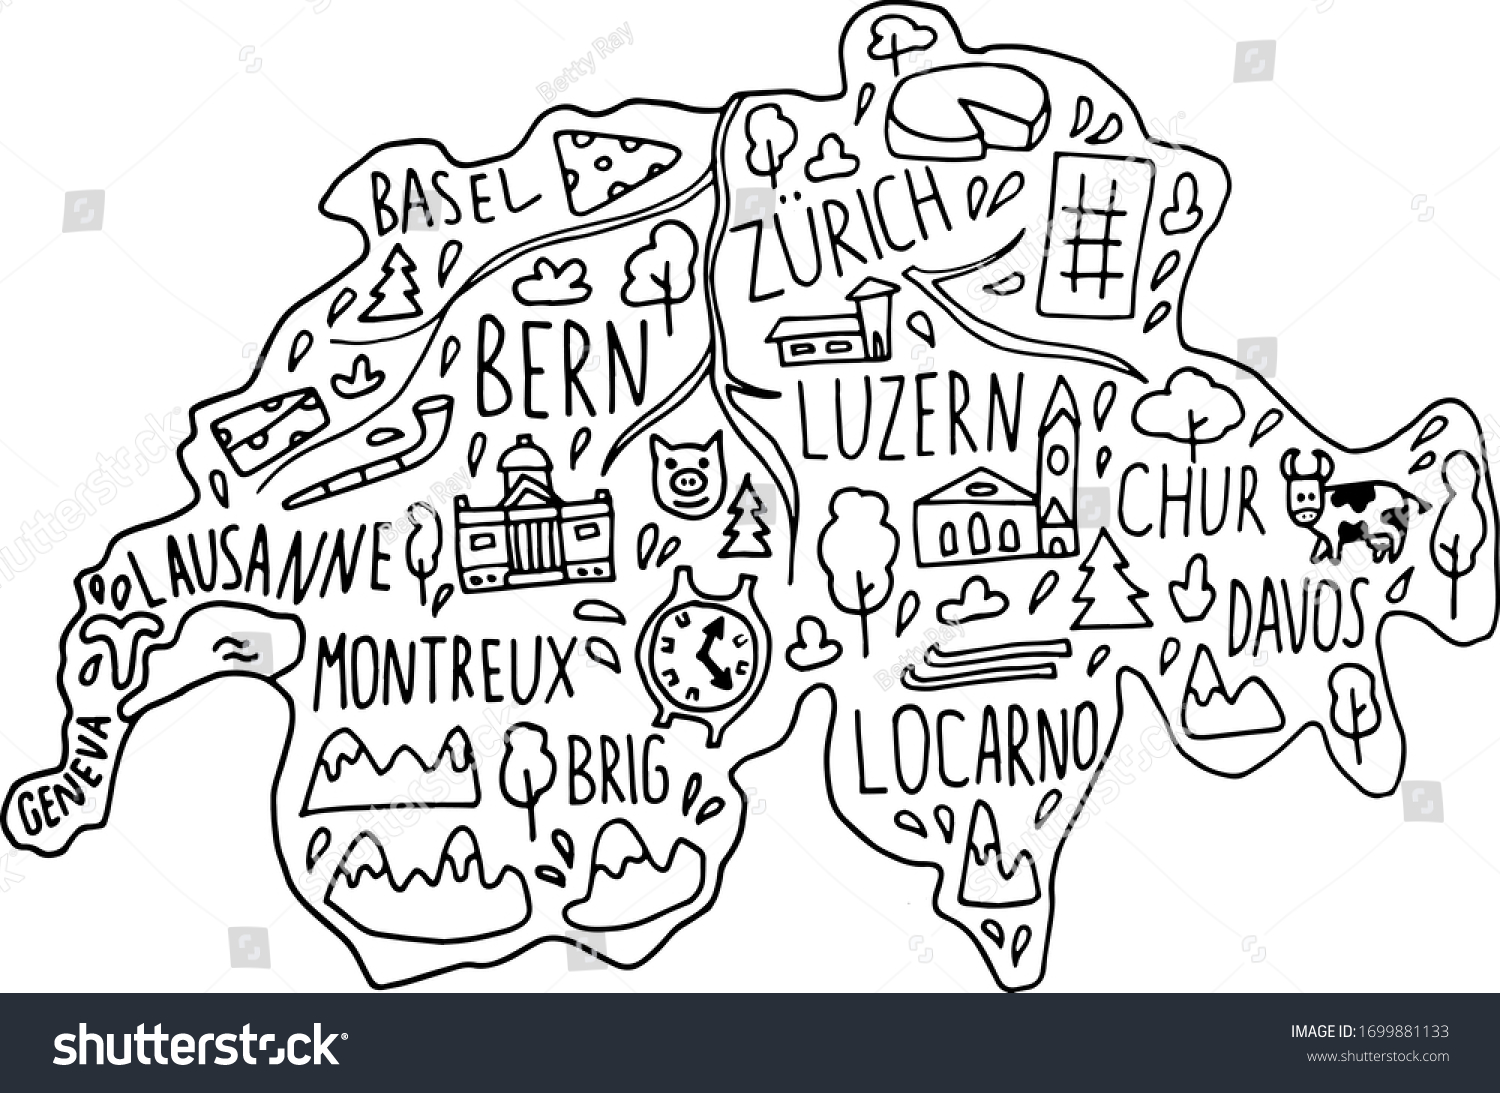 SVG of hand drawn doodle Switzerland map. Swiss city names lettering and cartoon landmarks, tourist attractions cliparts. travel, trip comic infographic poster. Bern, Zurich, lake, temple. svg